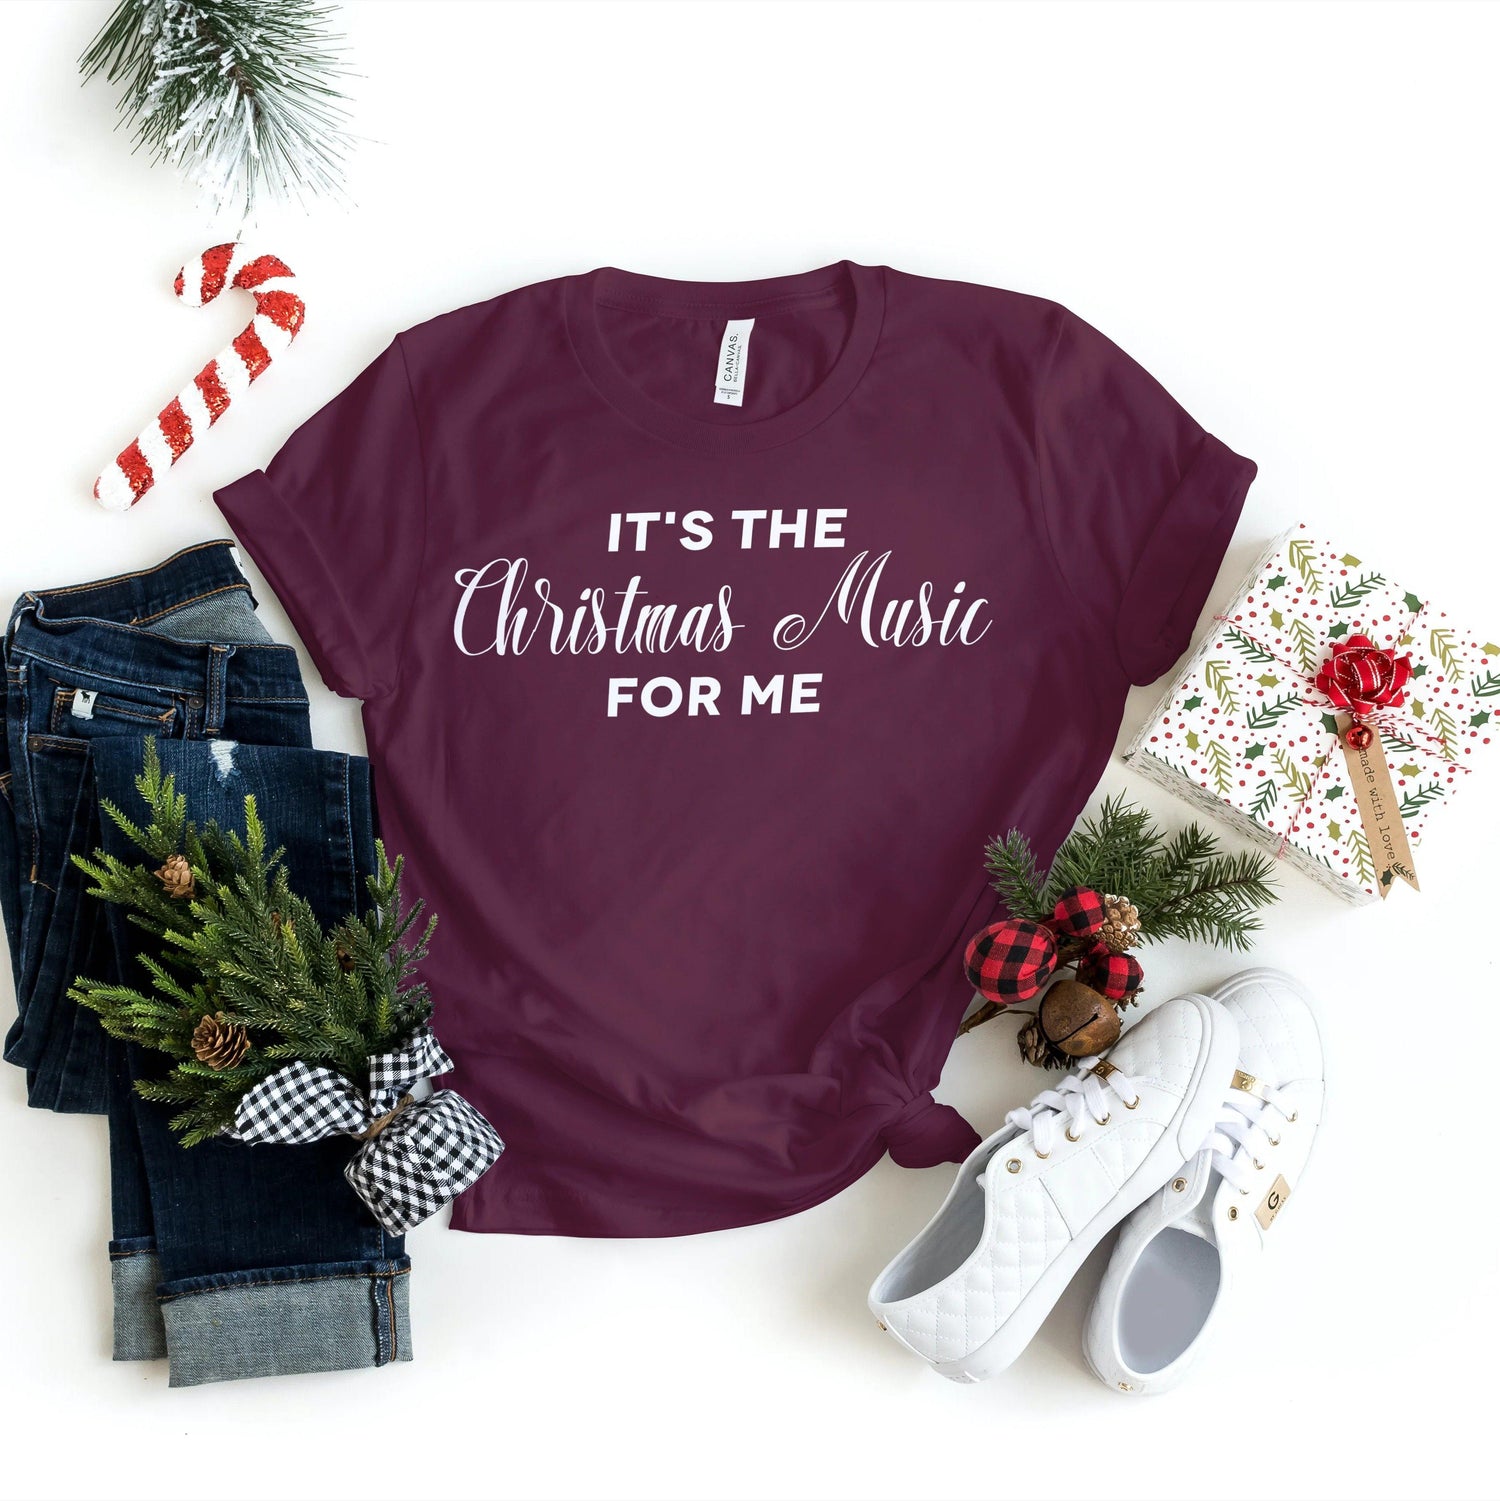 Family Christmas Shirts - Customizable - It's The For Me - Family Holiday Shirts - Group Shirts - Funny Holiday Shirts - Gifts - Healthy Wealthy Skinny